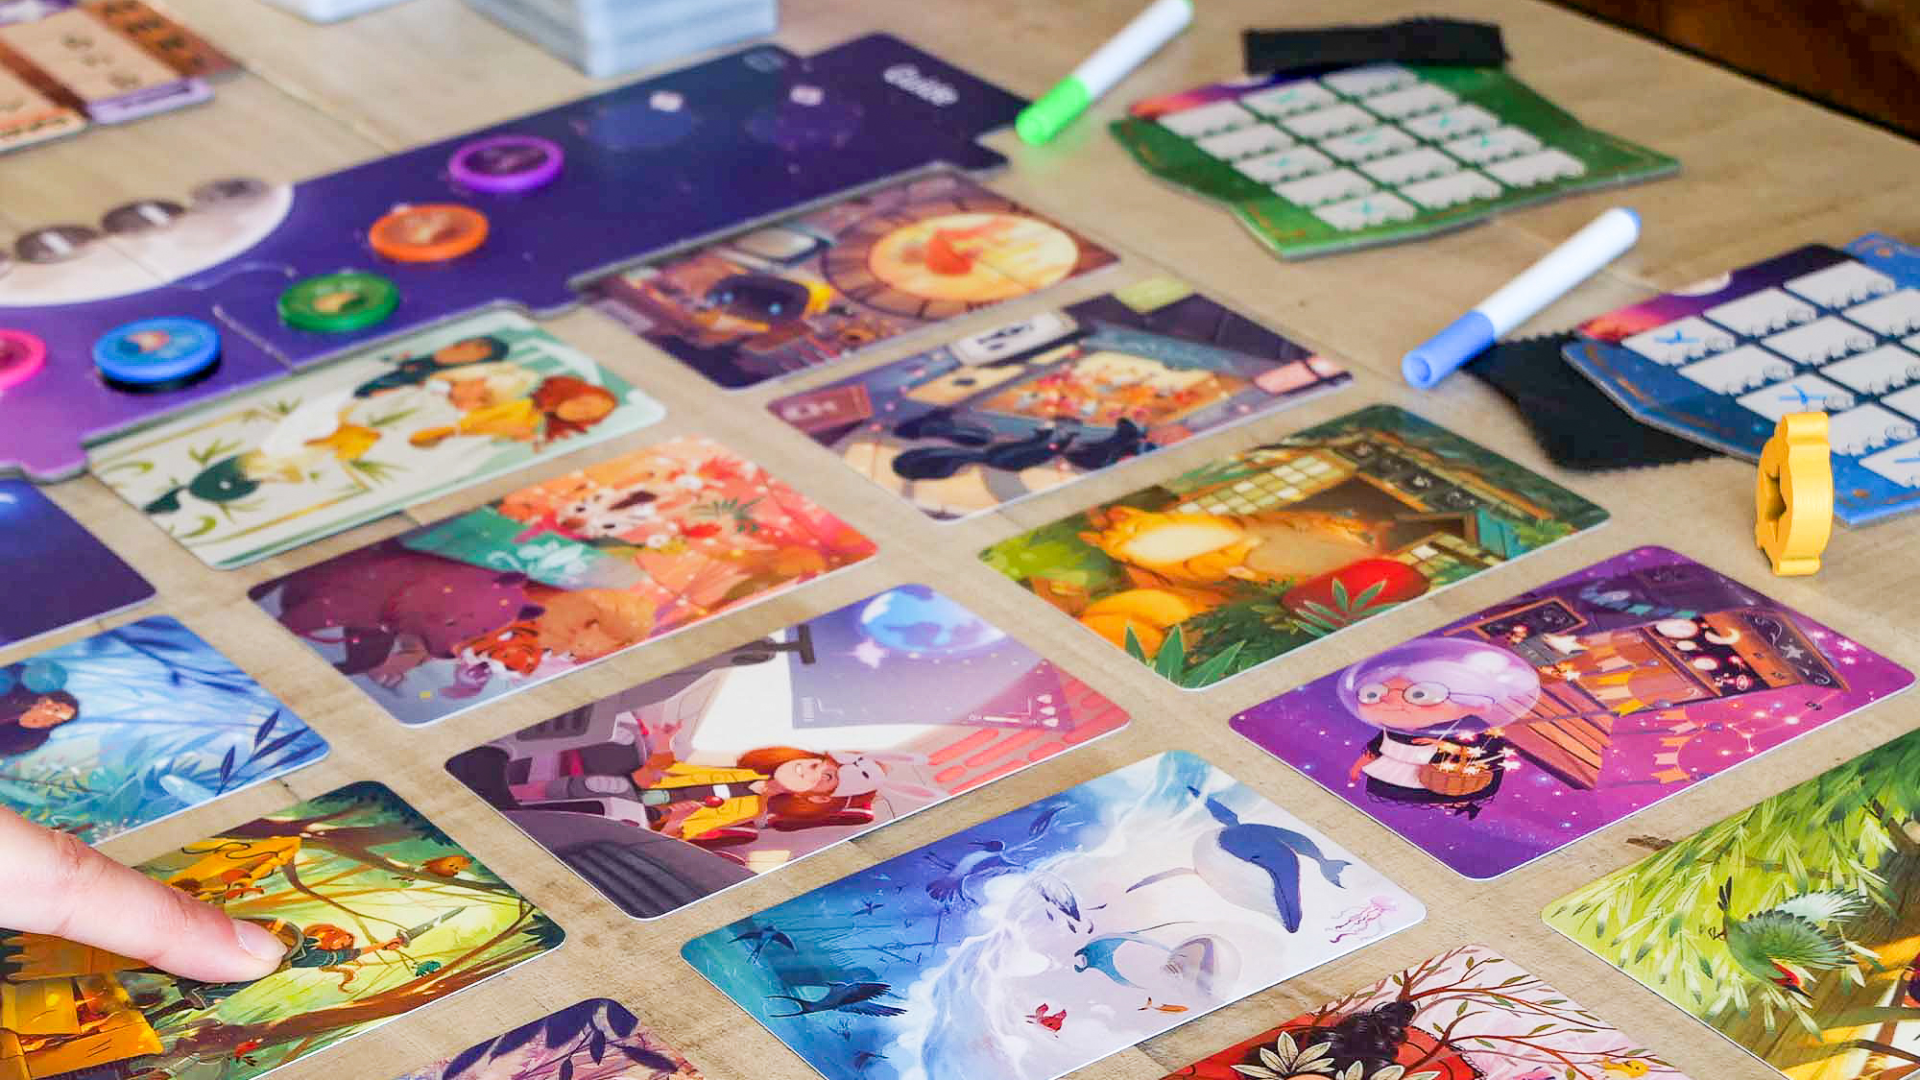 Image for Stella: Dixit Universe expands the artful card game by asking players to read minds and bet big